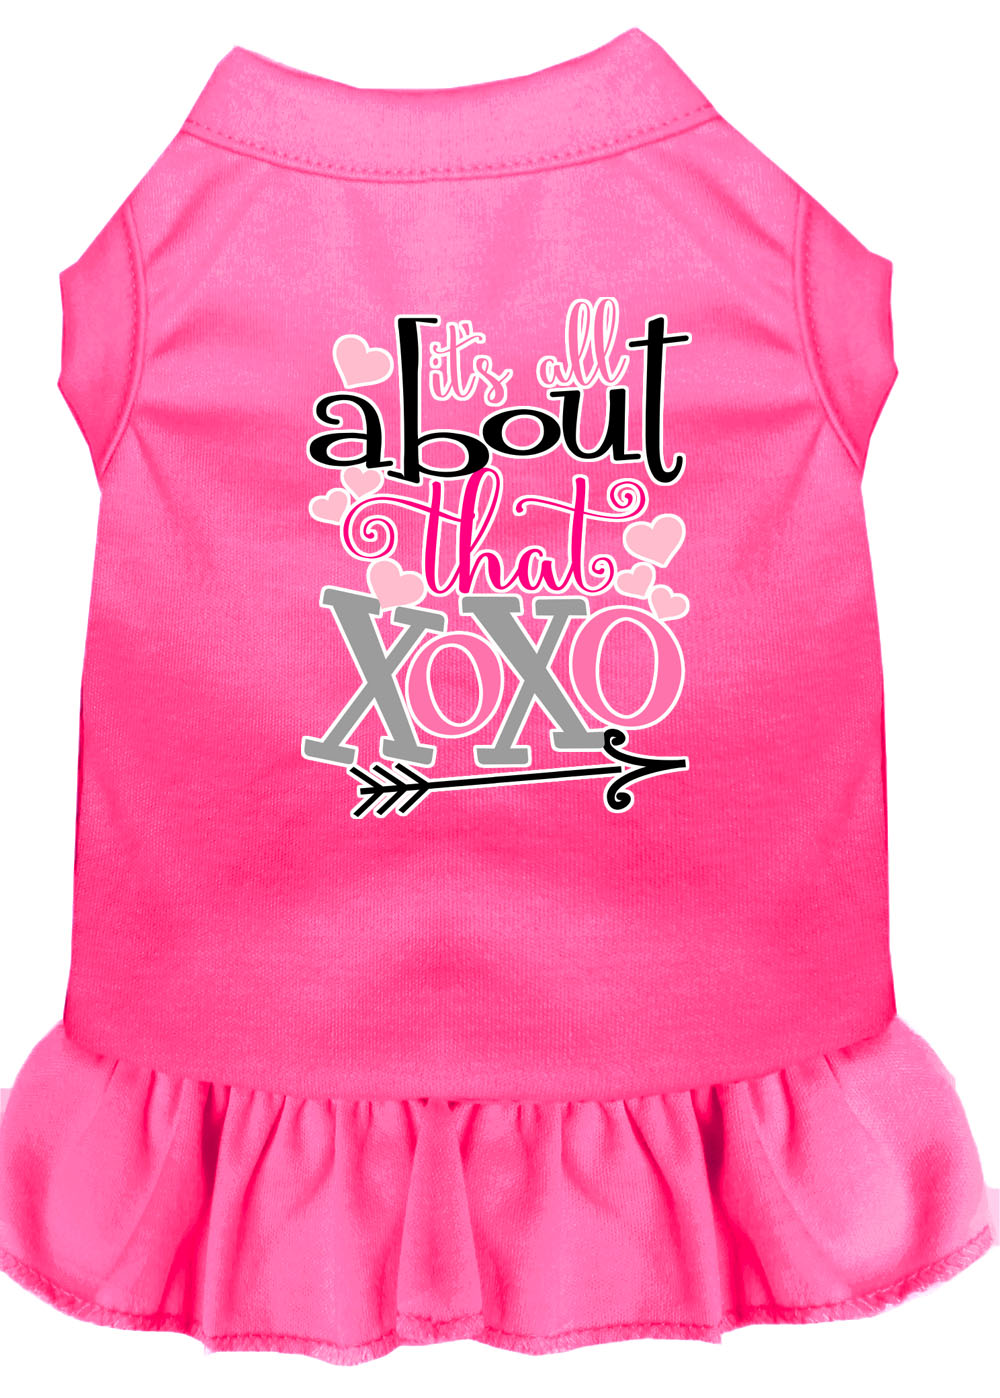 All about the XOXO Screen Print Dog Dress Bright Pink 4X